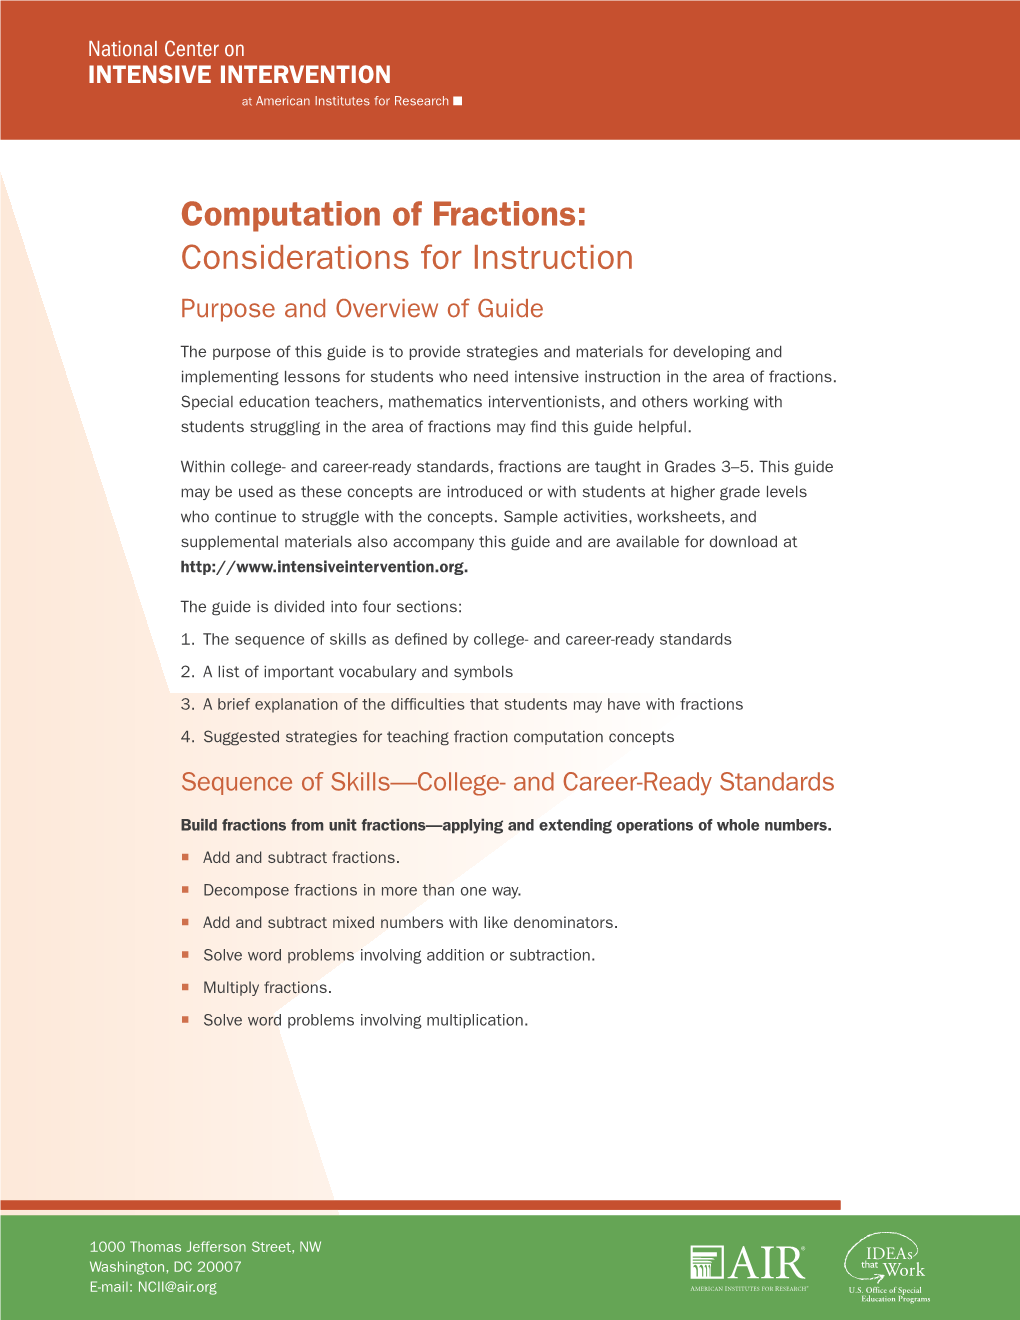 Computation of Fractions: Considerations for Instruction Purpose and Overview of Guide